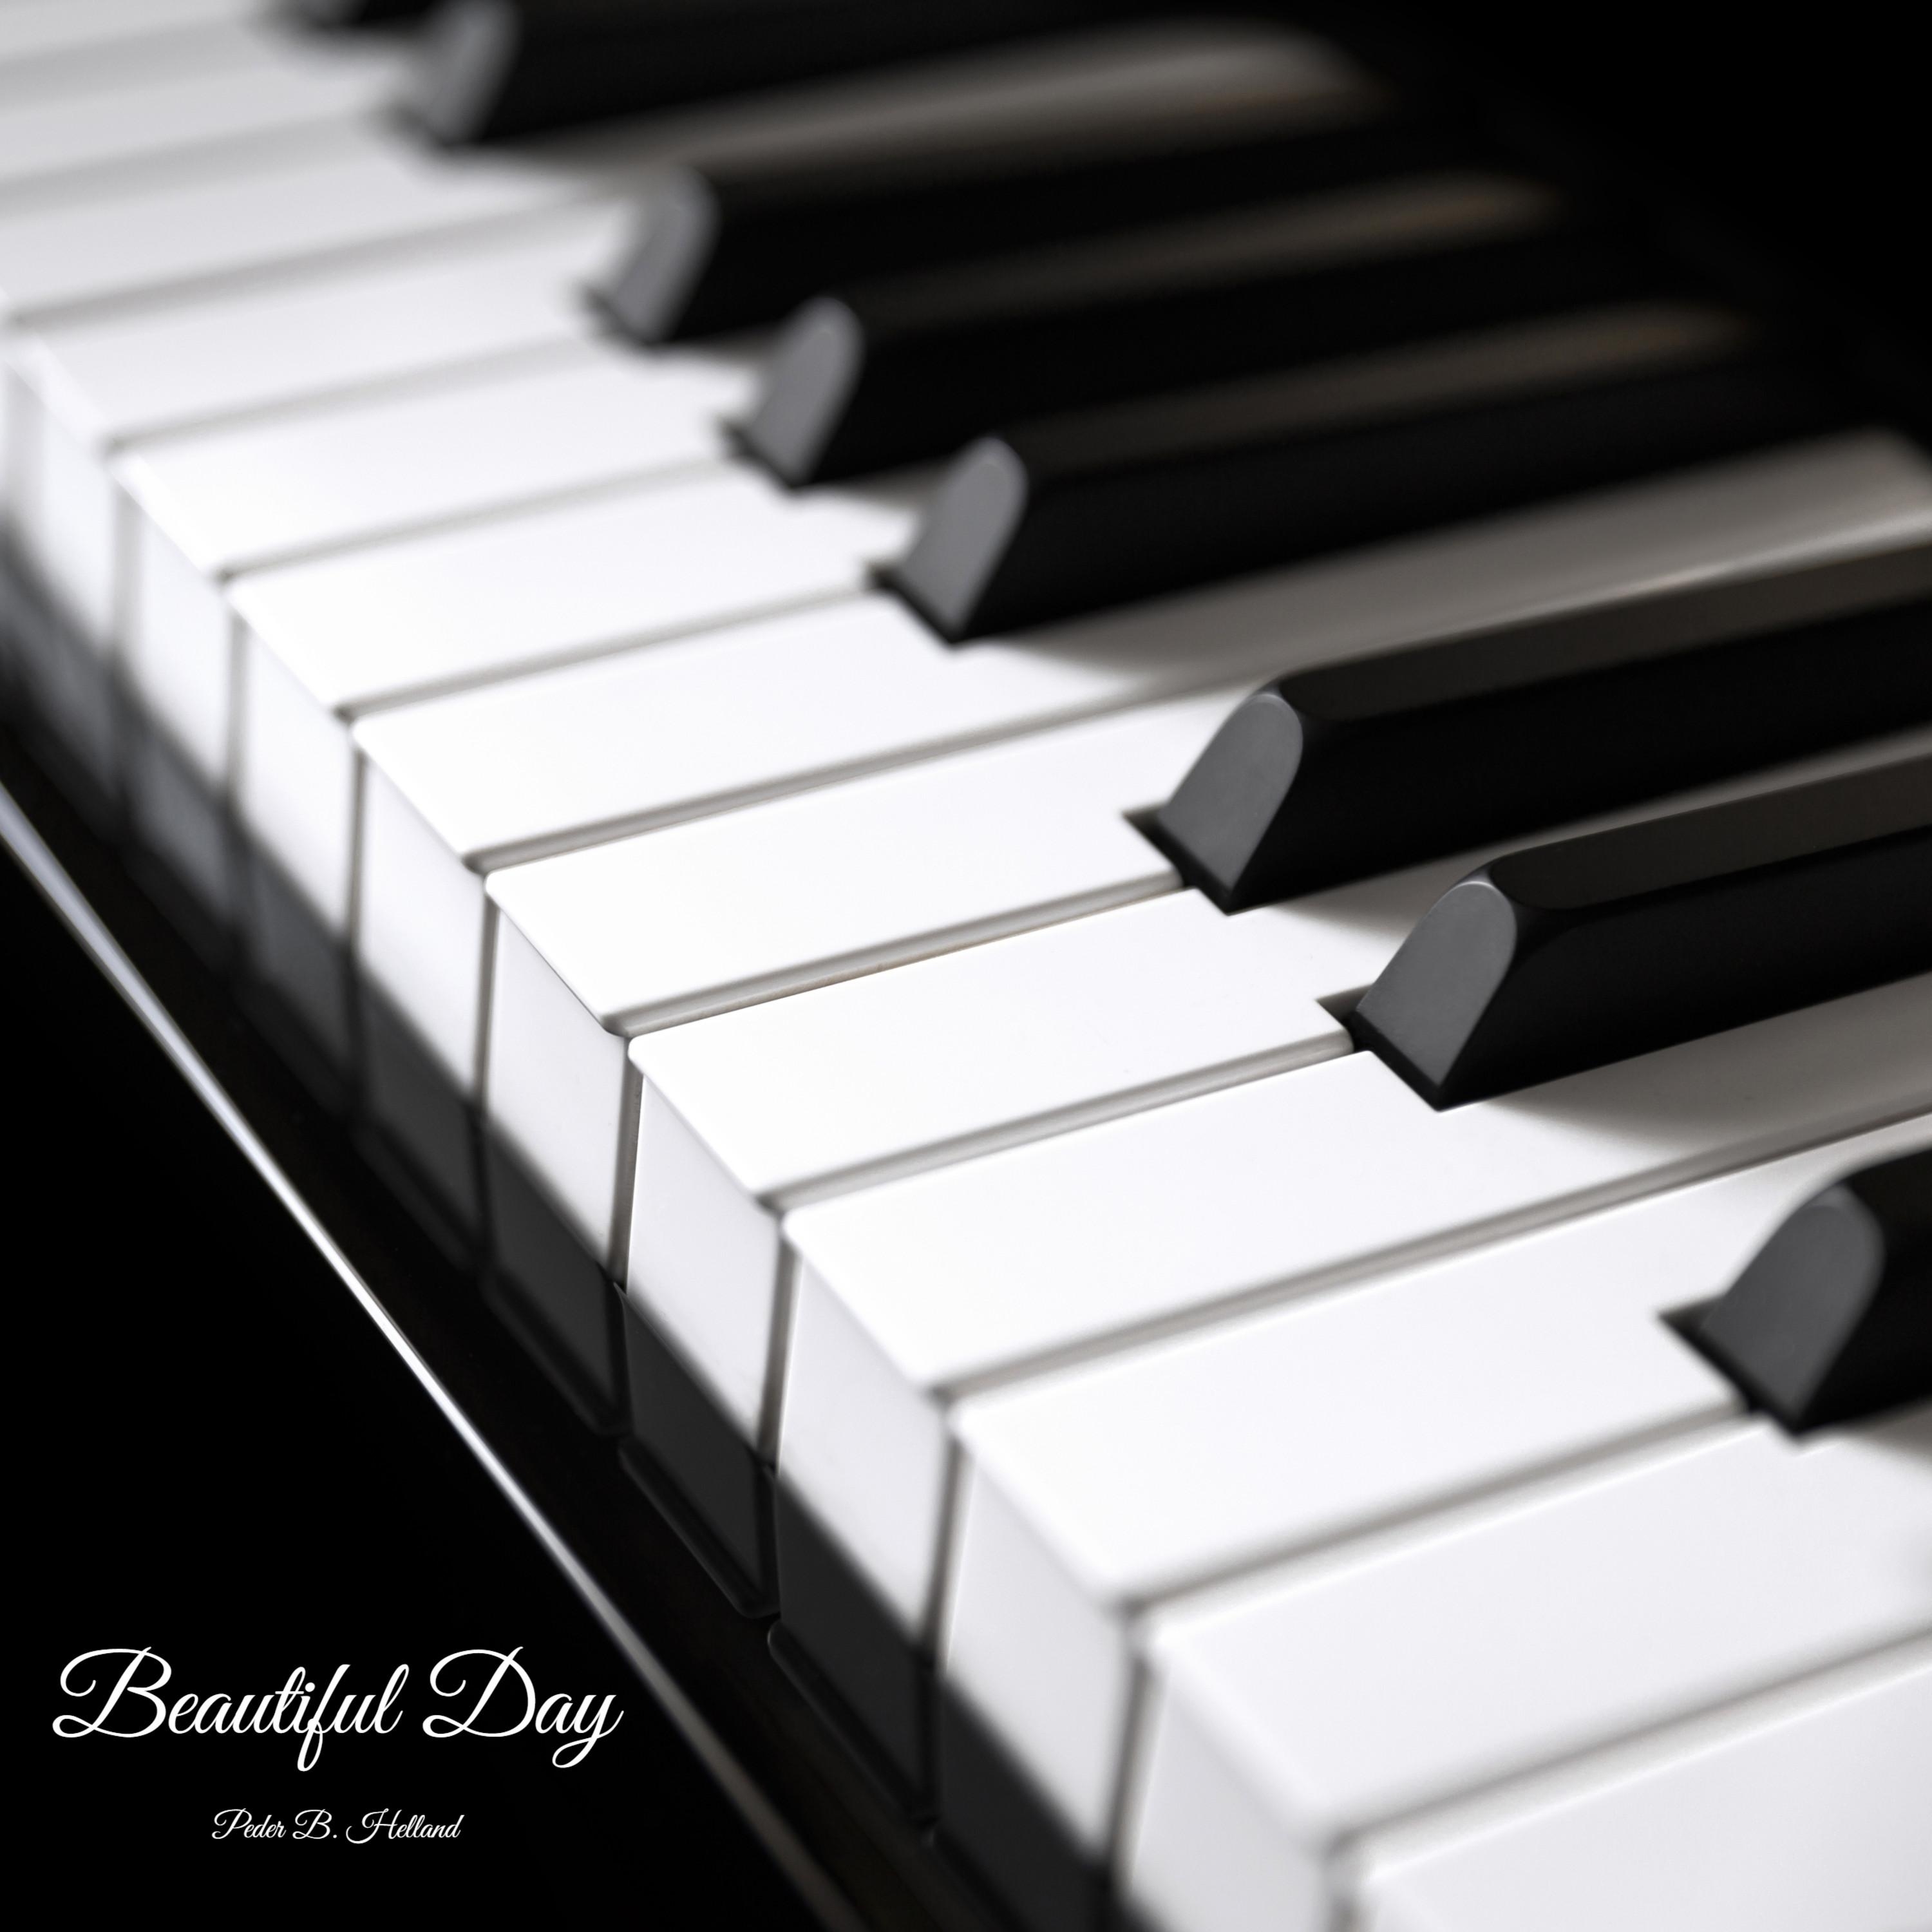 Cover art for the single Beautiful Day (Piano Version) by Peder B. Helland